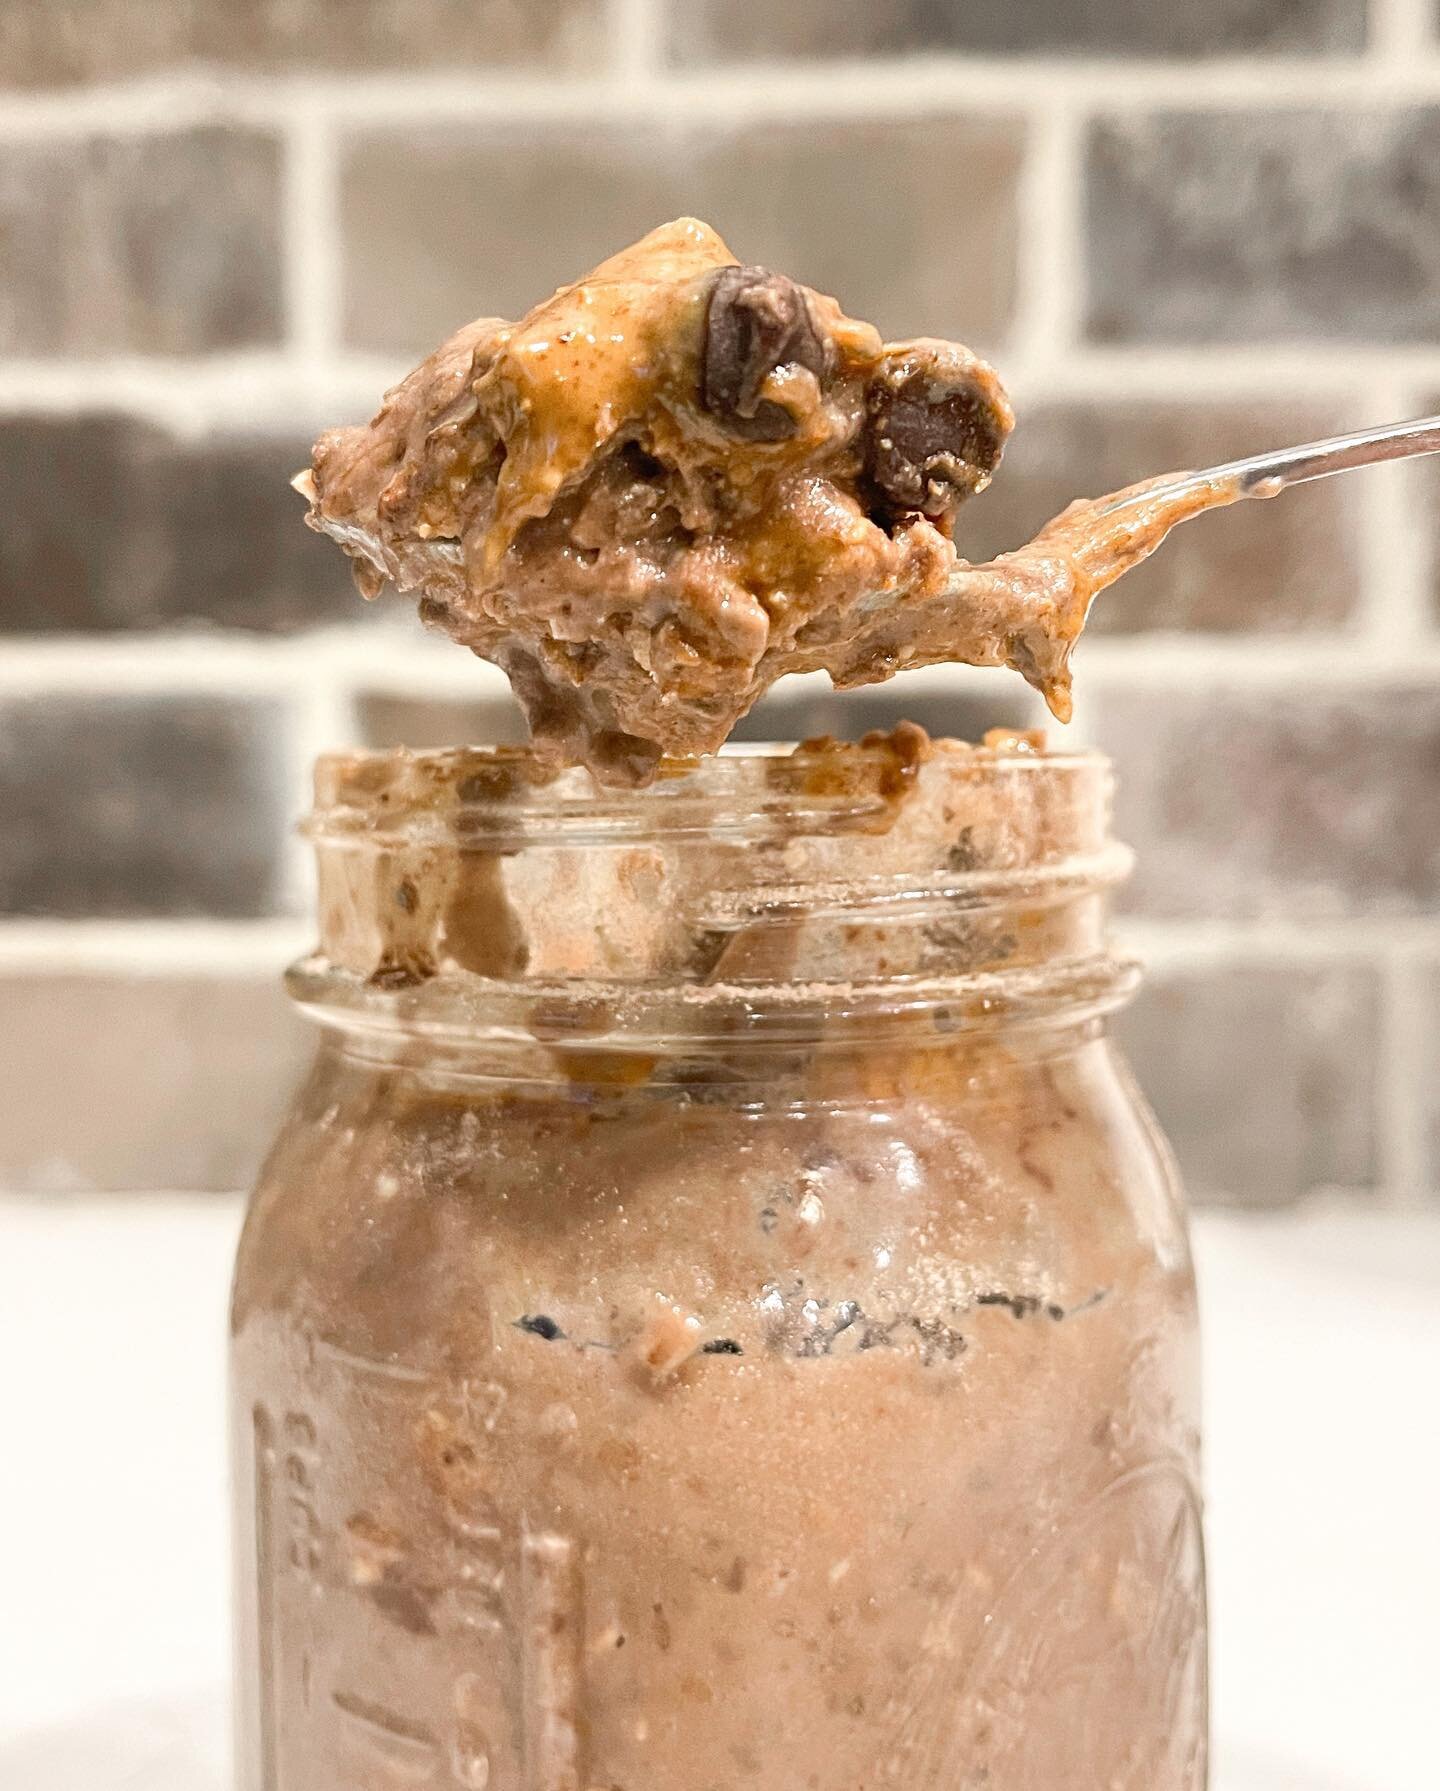 ✨HEALTHY MOCHA PROTEIN OVERNIGHT OATS✨

Ingredients:
- 1/3 cup old fashioned oats, dry 
- 1 Tbs chia seeds 
- 1 scoop fav protein powder (I used Mocha protein by @legion . Code &lsquo;KAILI&rsquo; saves you 20%)
- 1 Tbs unsweetened cocoa powder 
- 8o